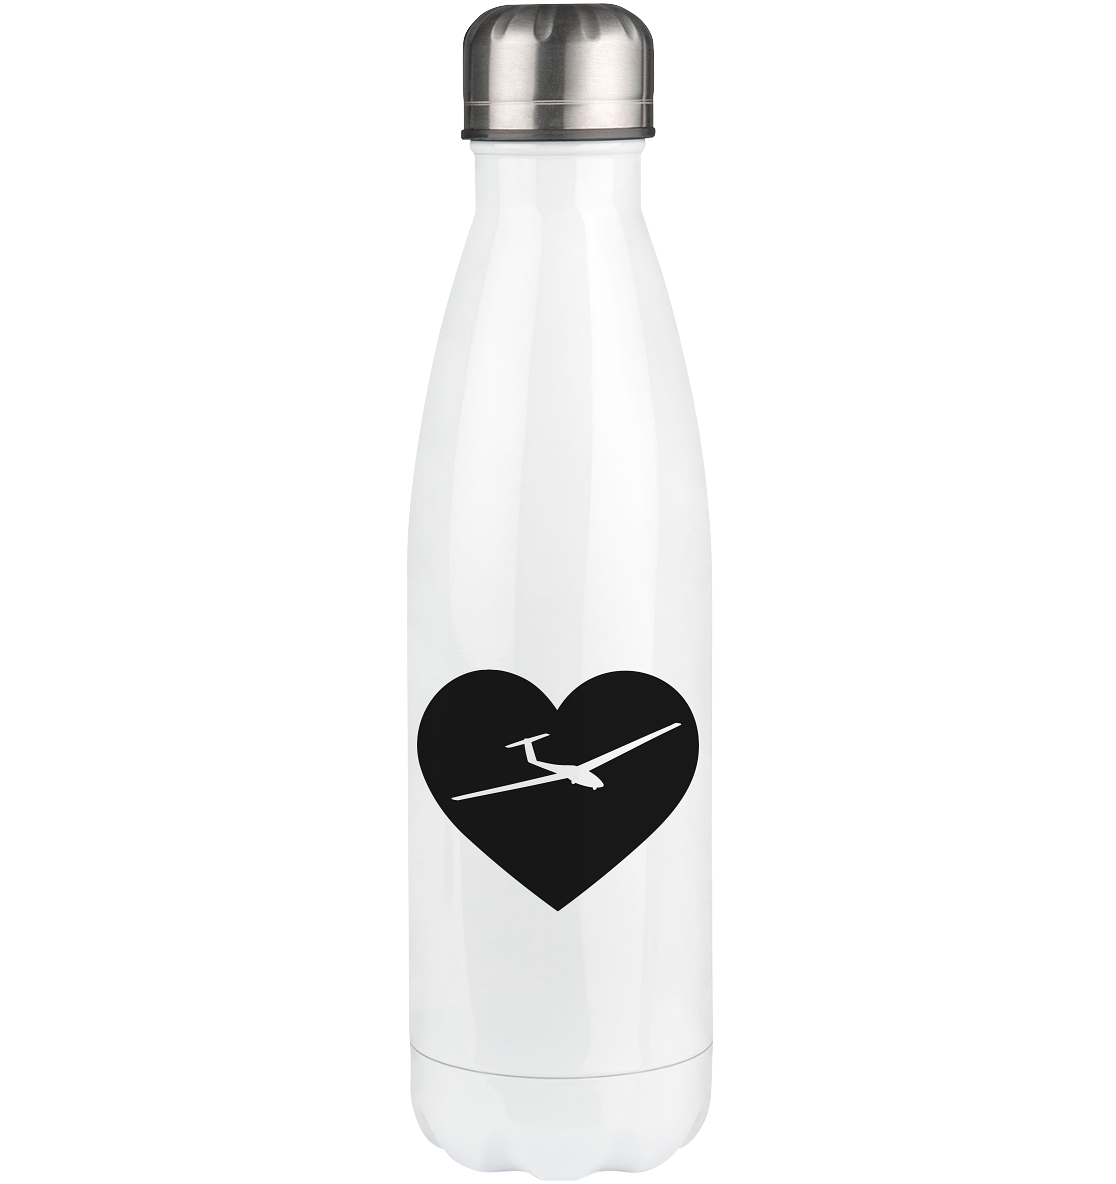 Heart 1 and Sailplane - Edelstahl Thermosflasche berge 500ml